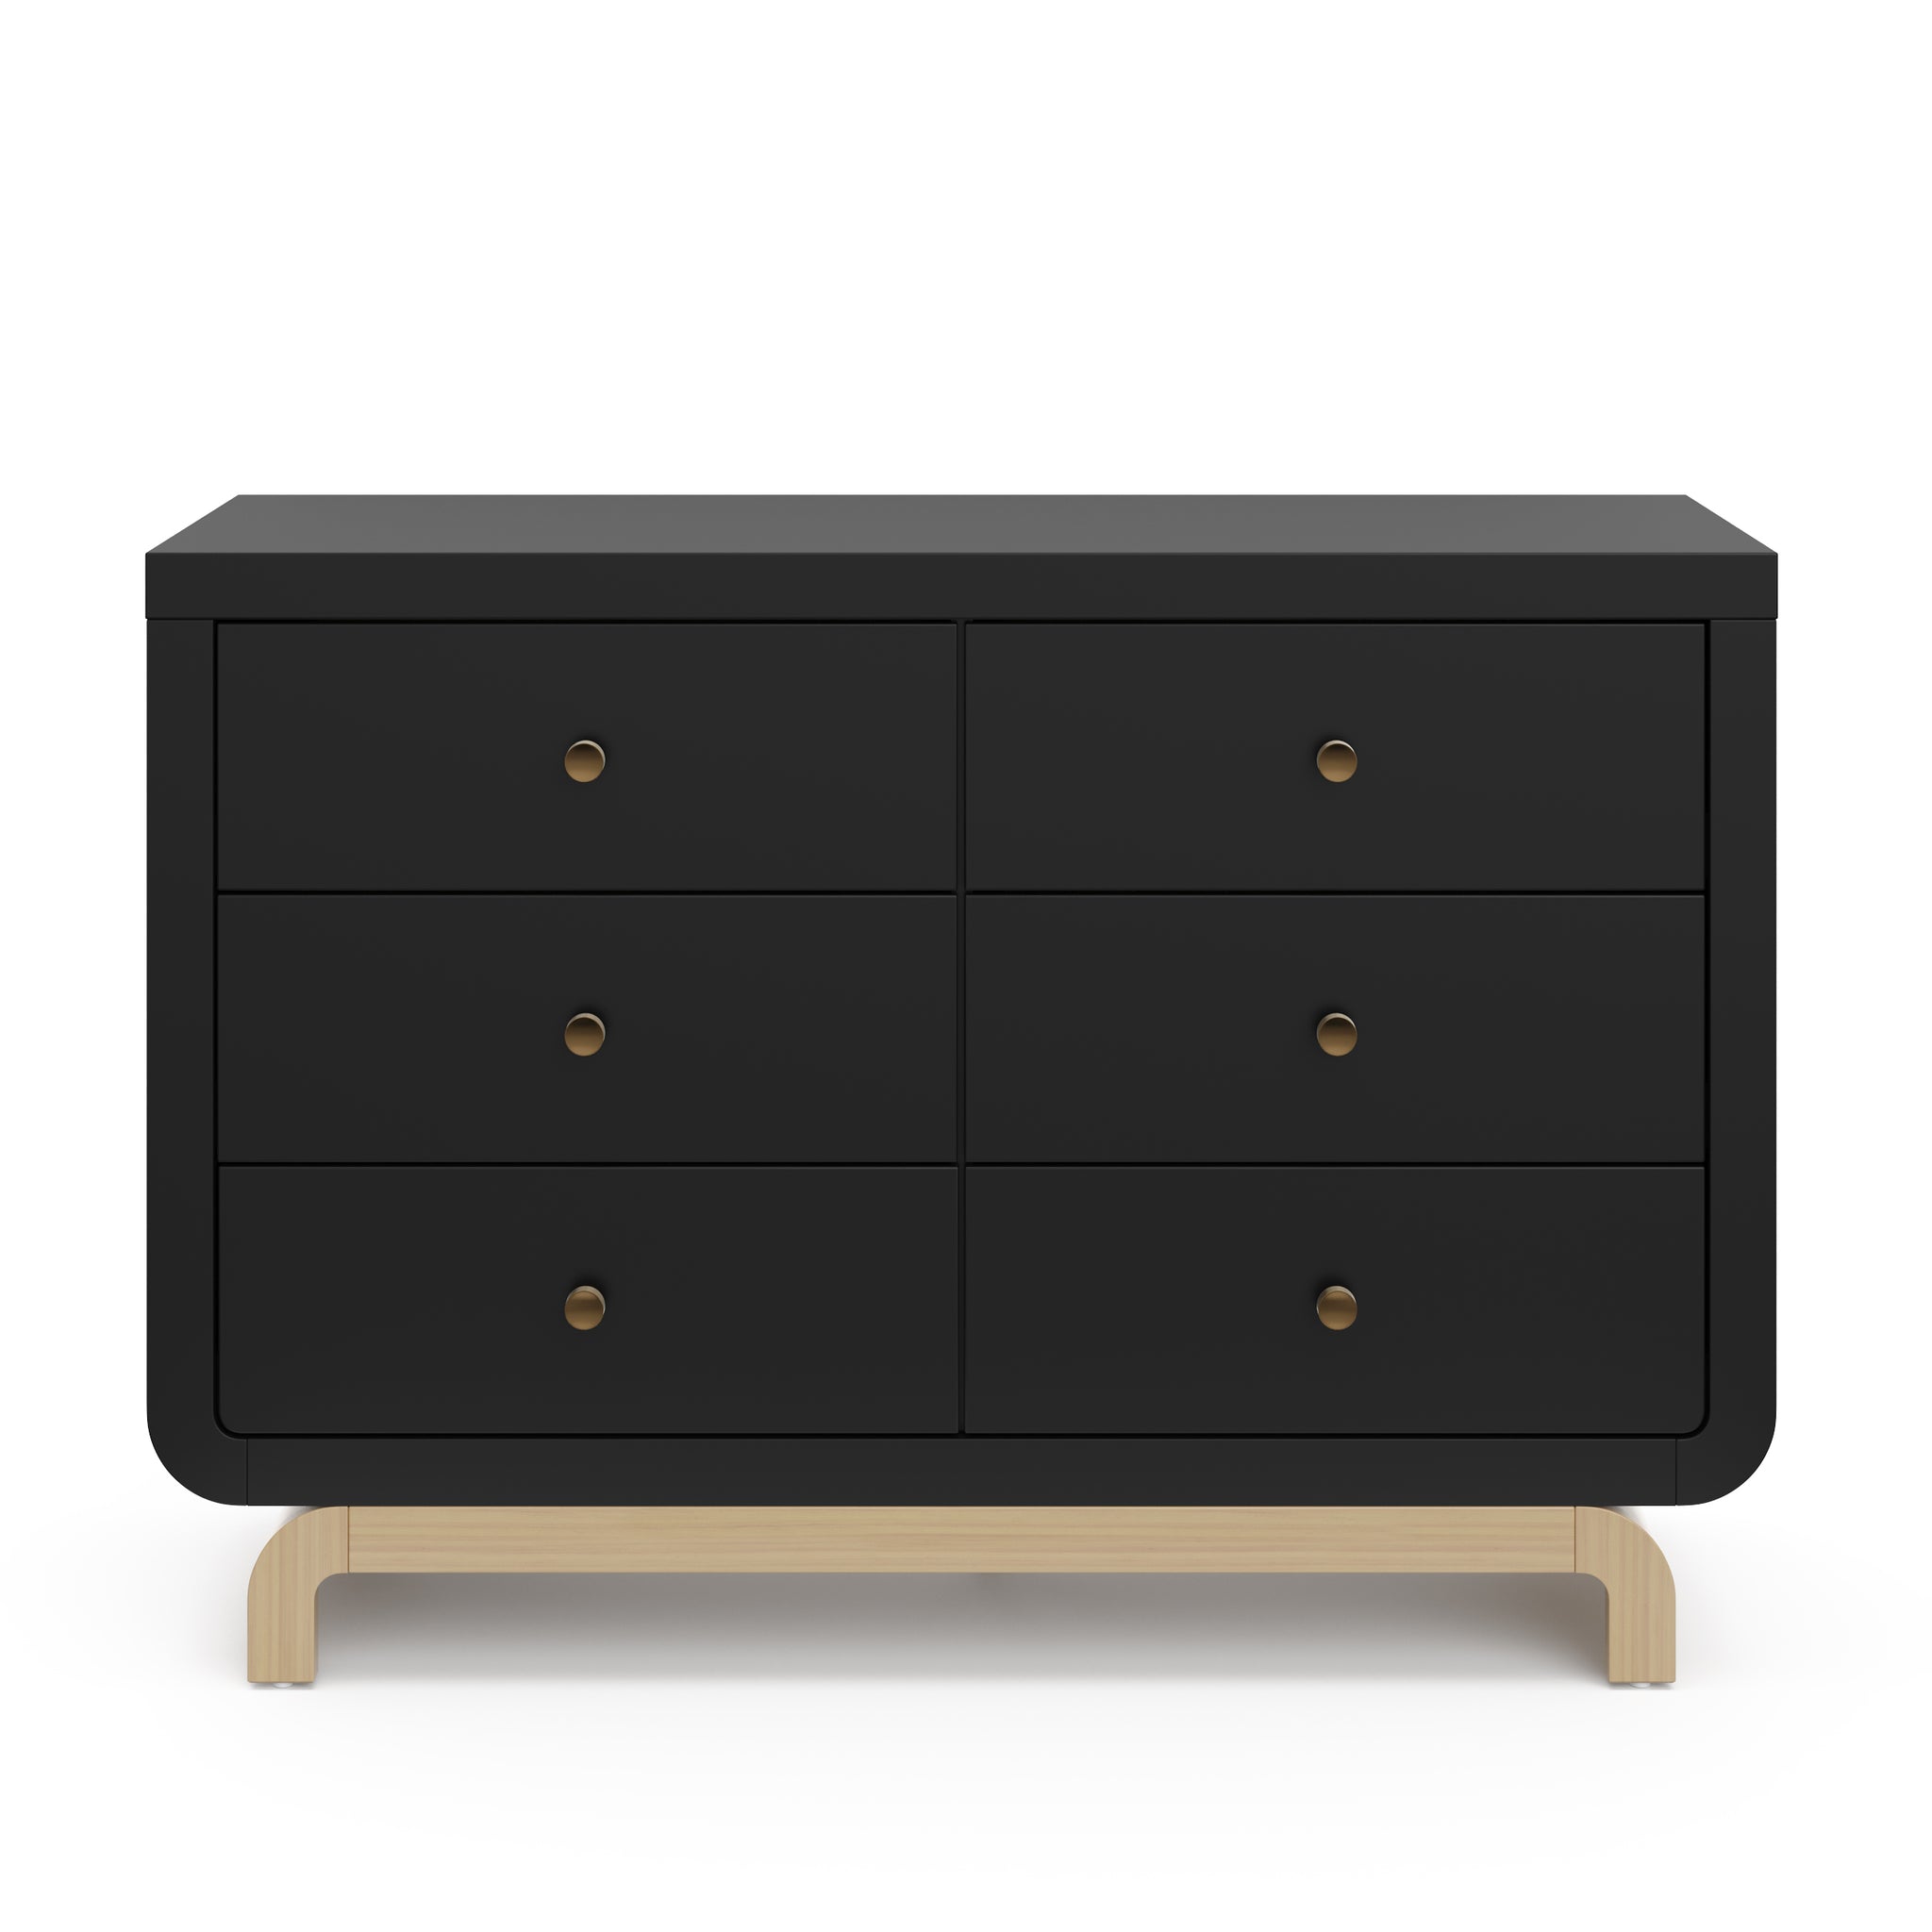 Front view of black 6 drawer dresser with driftwood base